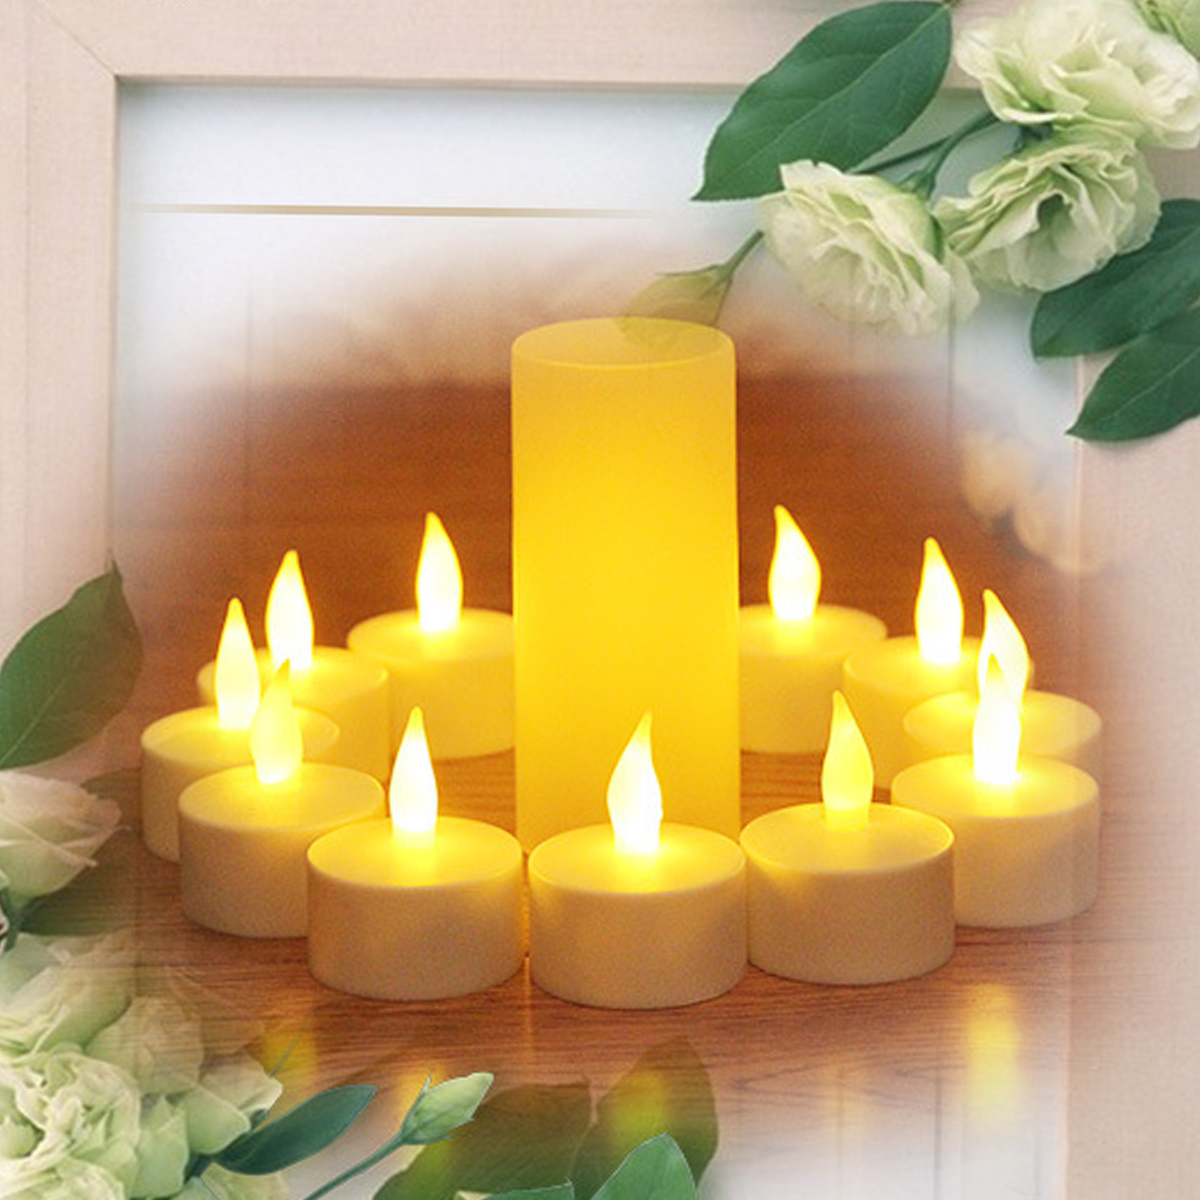 12PCS-Flameless-LED-Candle-Light-Rechargeable-Flickering-Tea-Lamp-for-Birthday-Party-US-Plug-AC110V-1675885-4